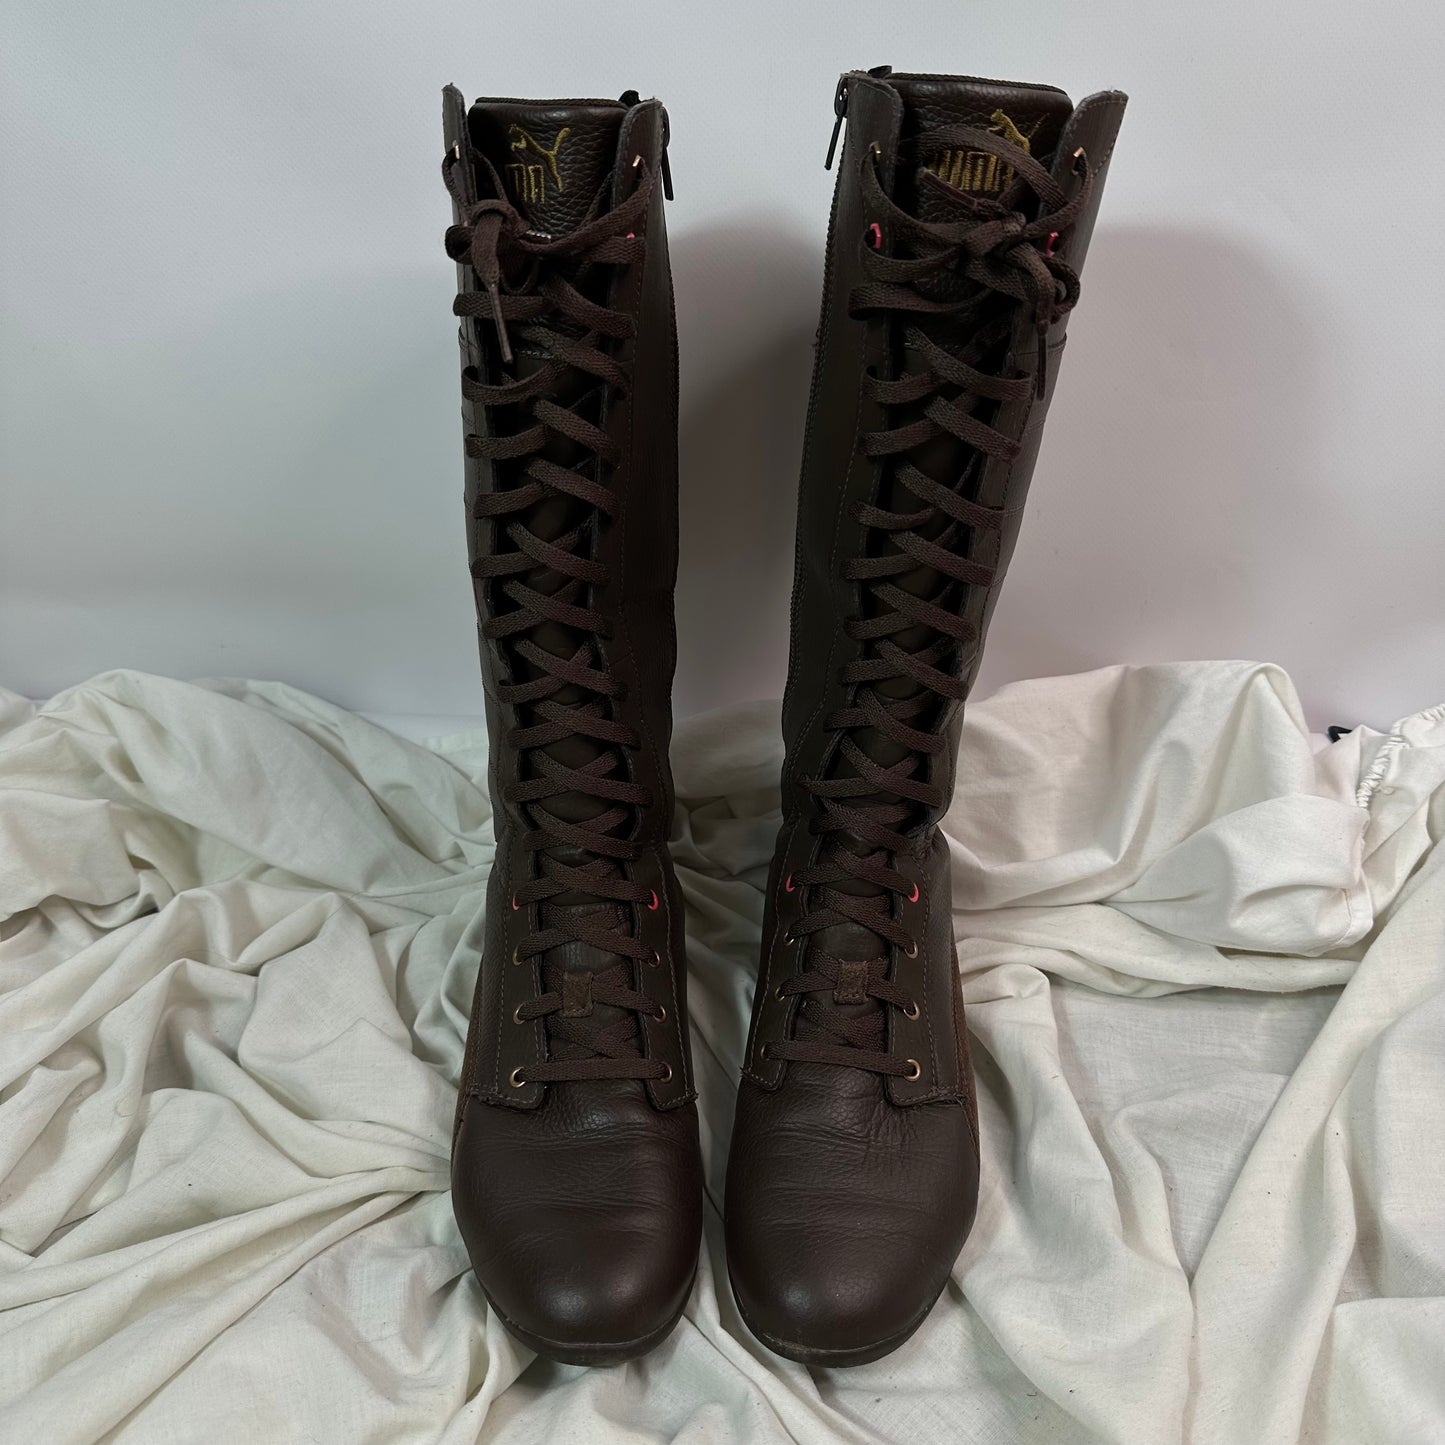 Puma Vintage Knee High Boxing Boots 37.5/38.5